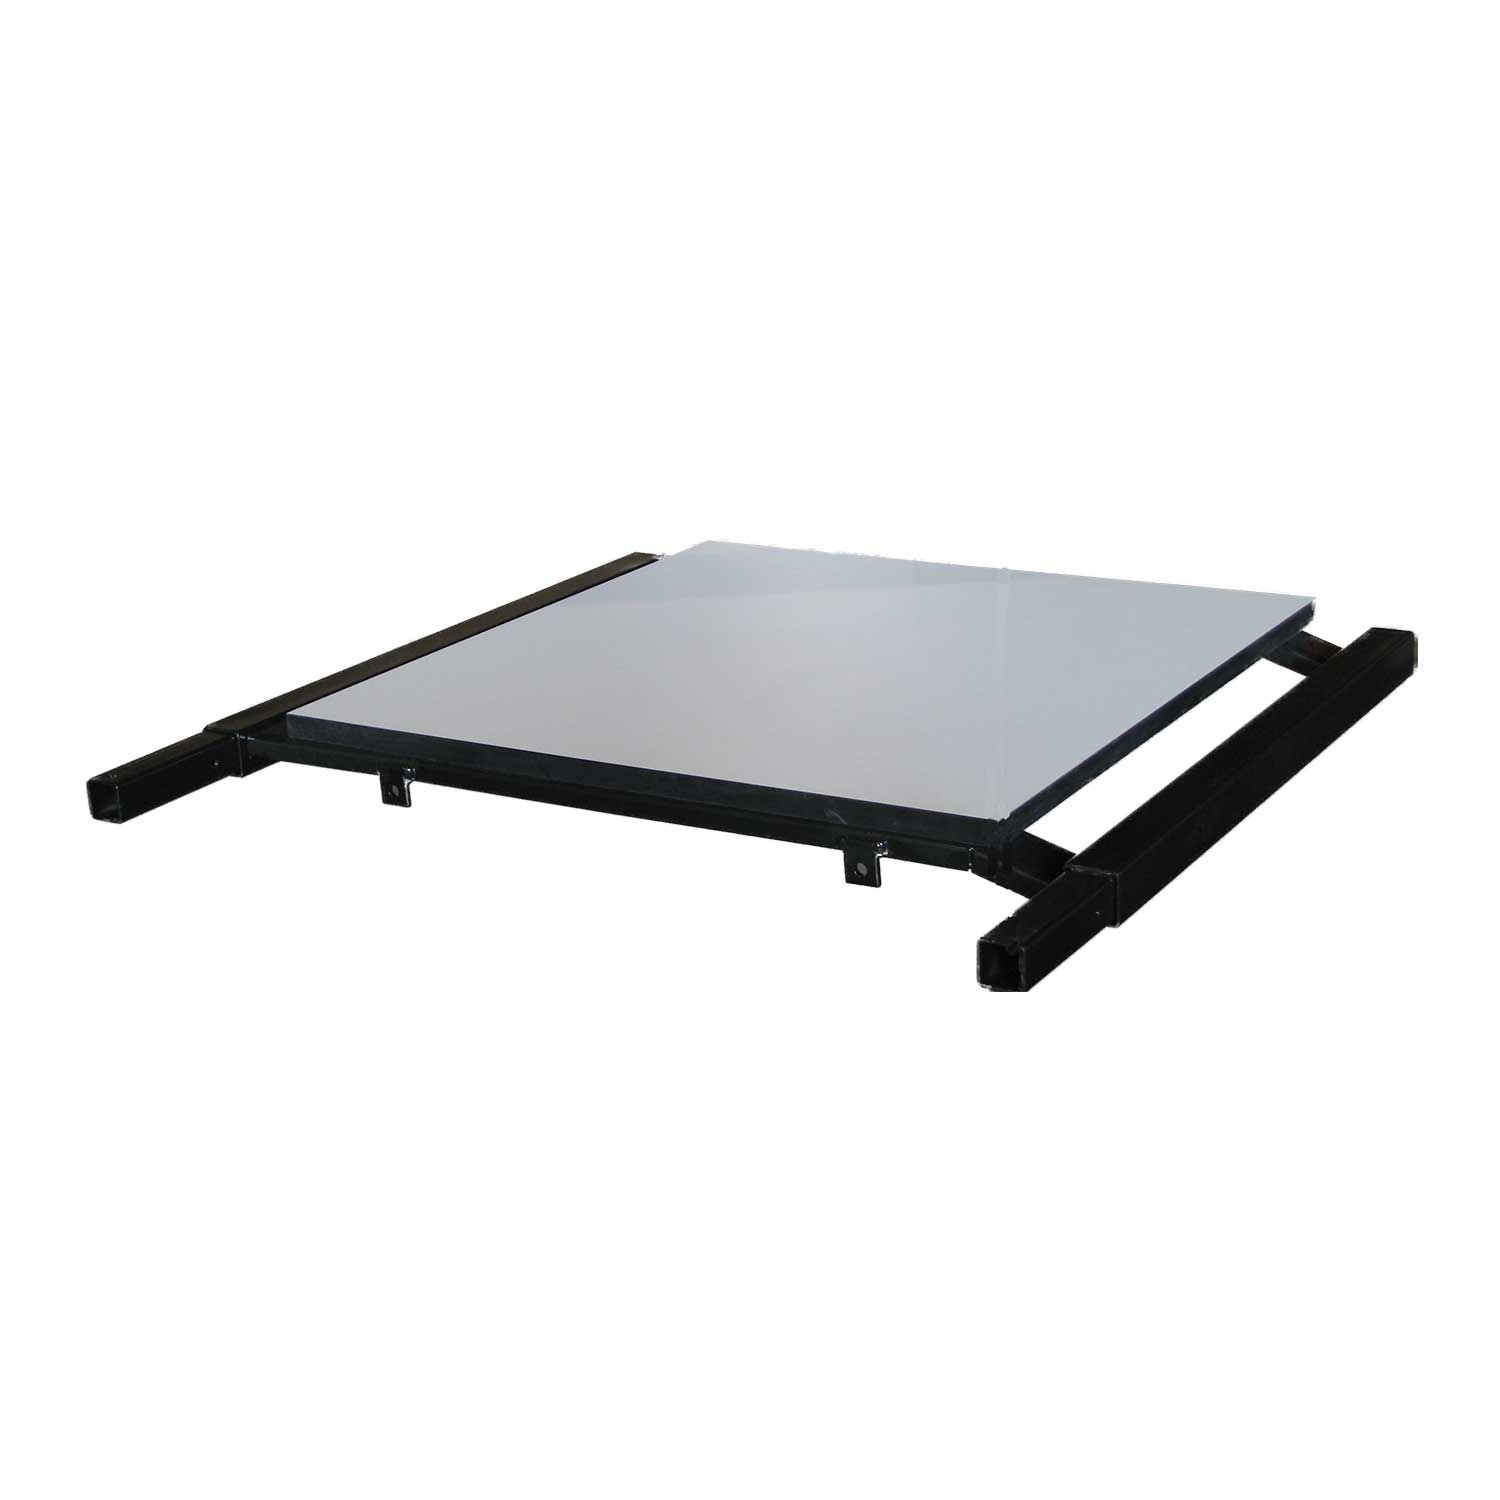 Model 2790-EXT Extension Table for 2790